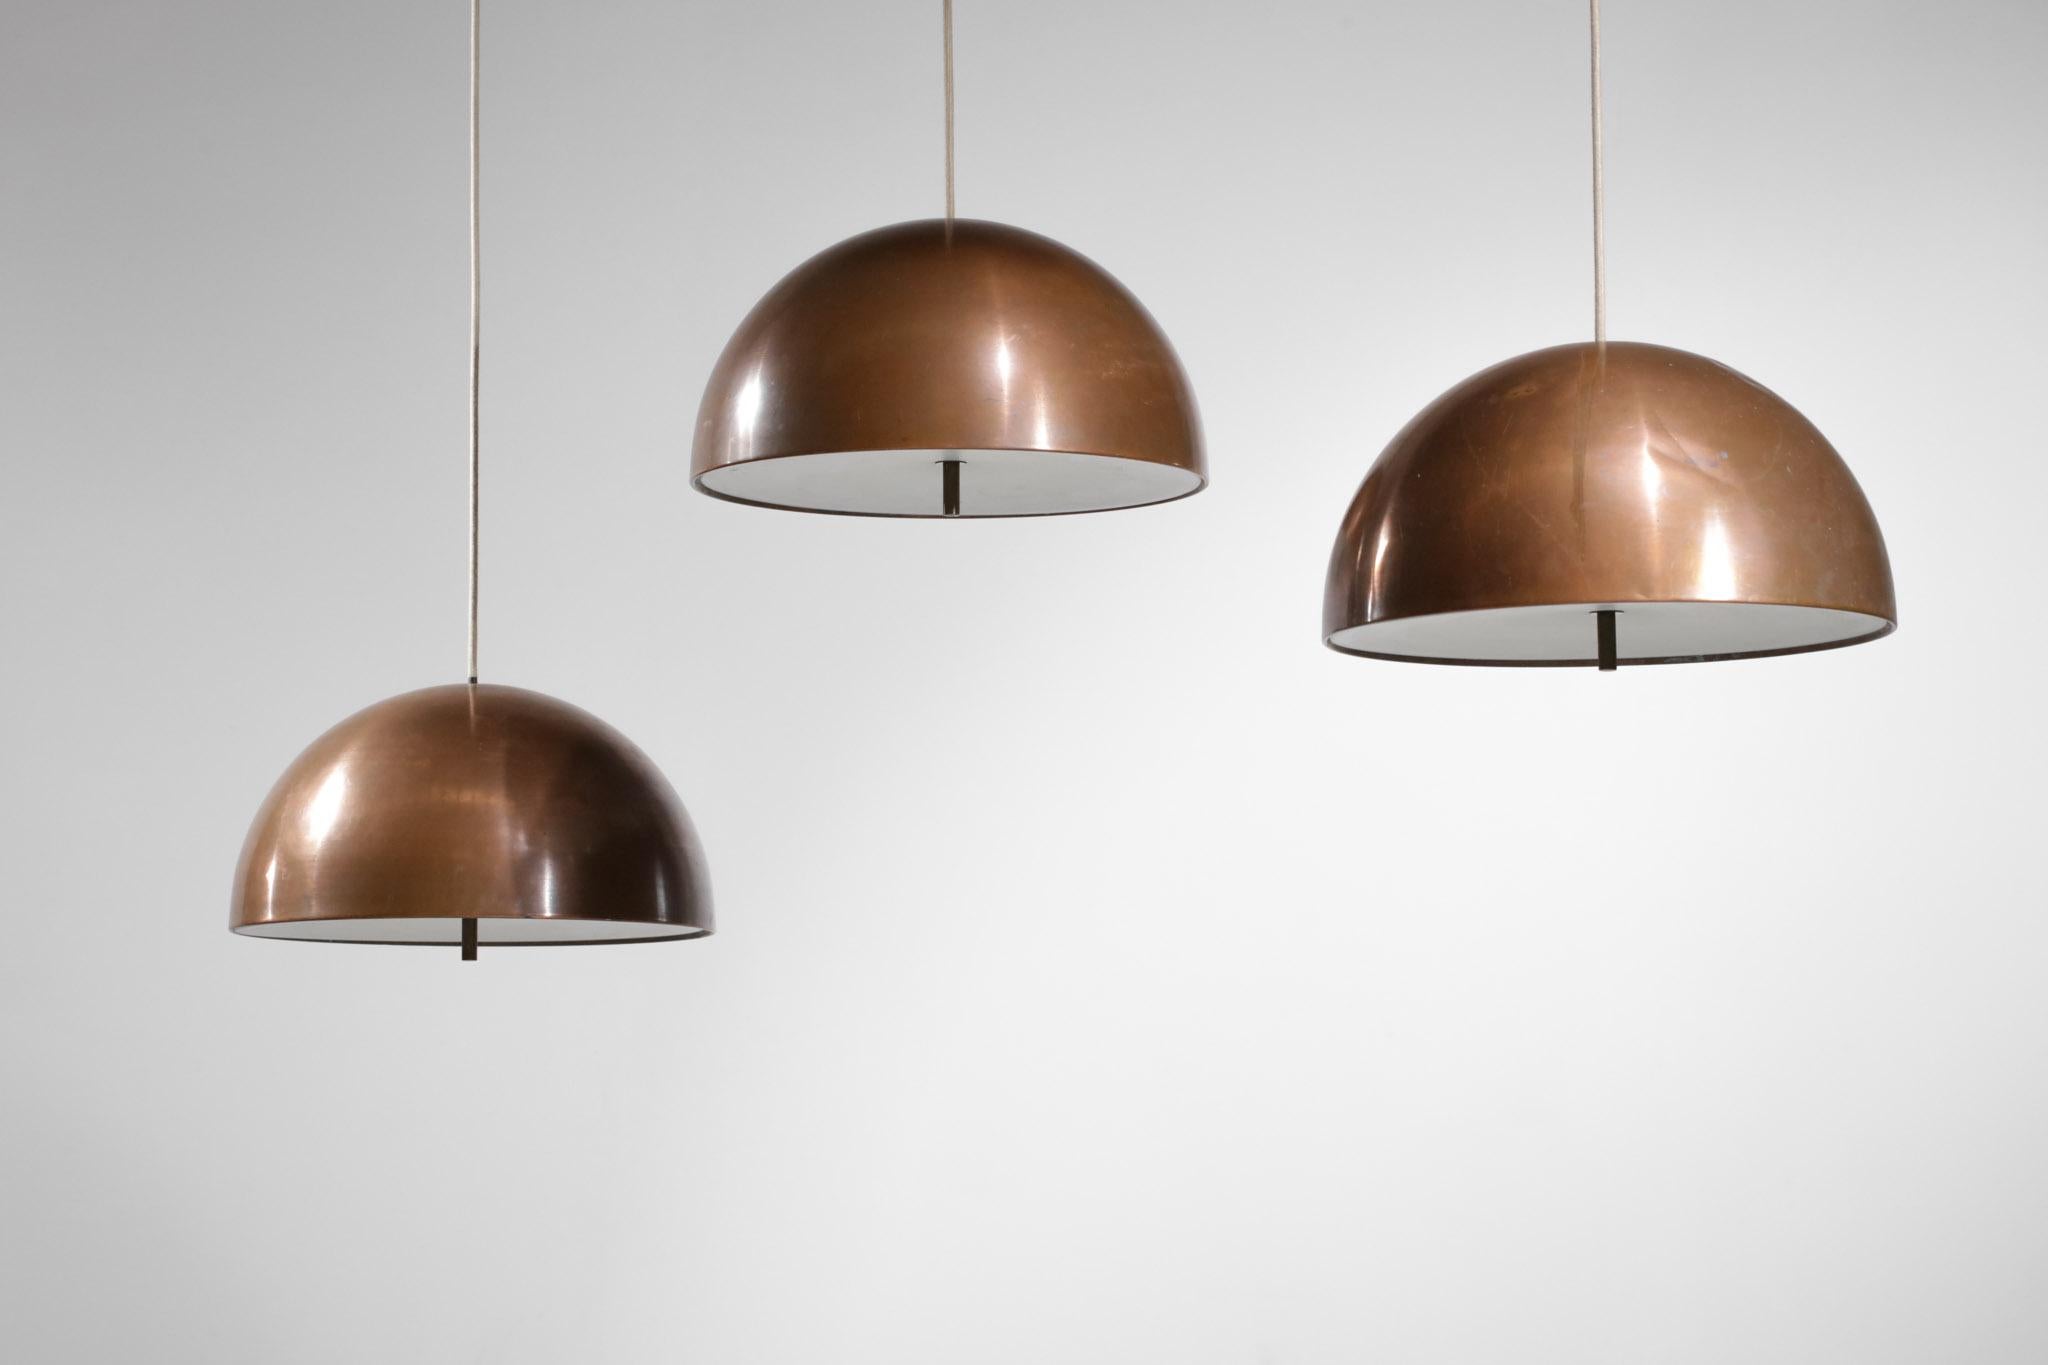 Set of three Scandinavian 1960s pendant lamps by Danish designer Jo Hammerborg. Copper lampshade and white plastic diffusers requiring three bulbs per suspension. Nice vintage condition, please note traces of use and time on the shades (see